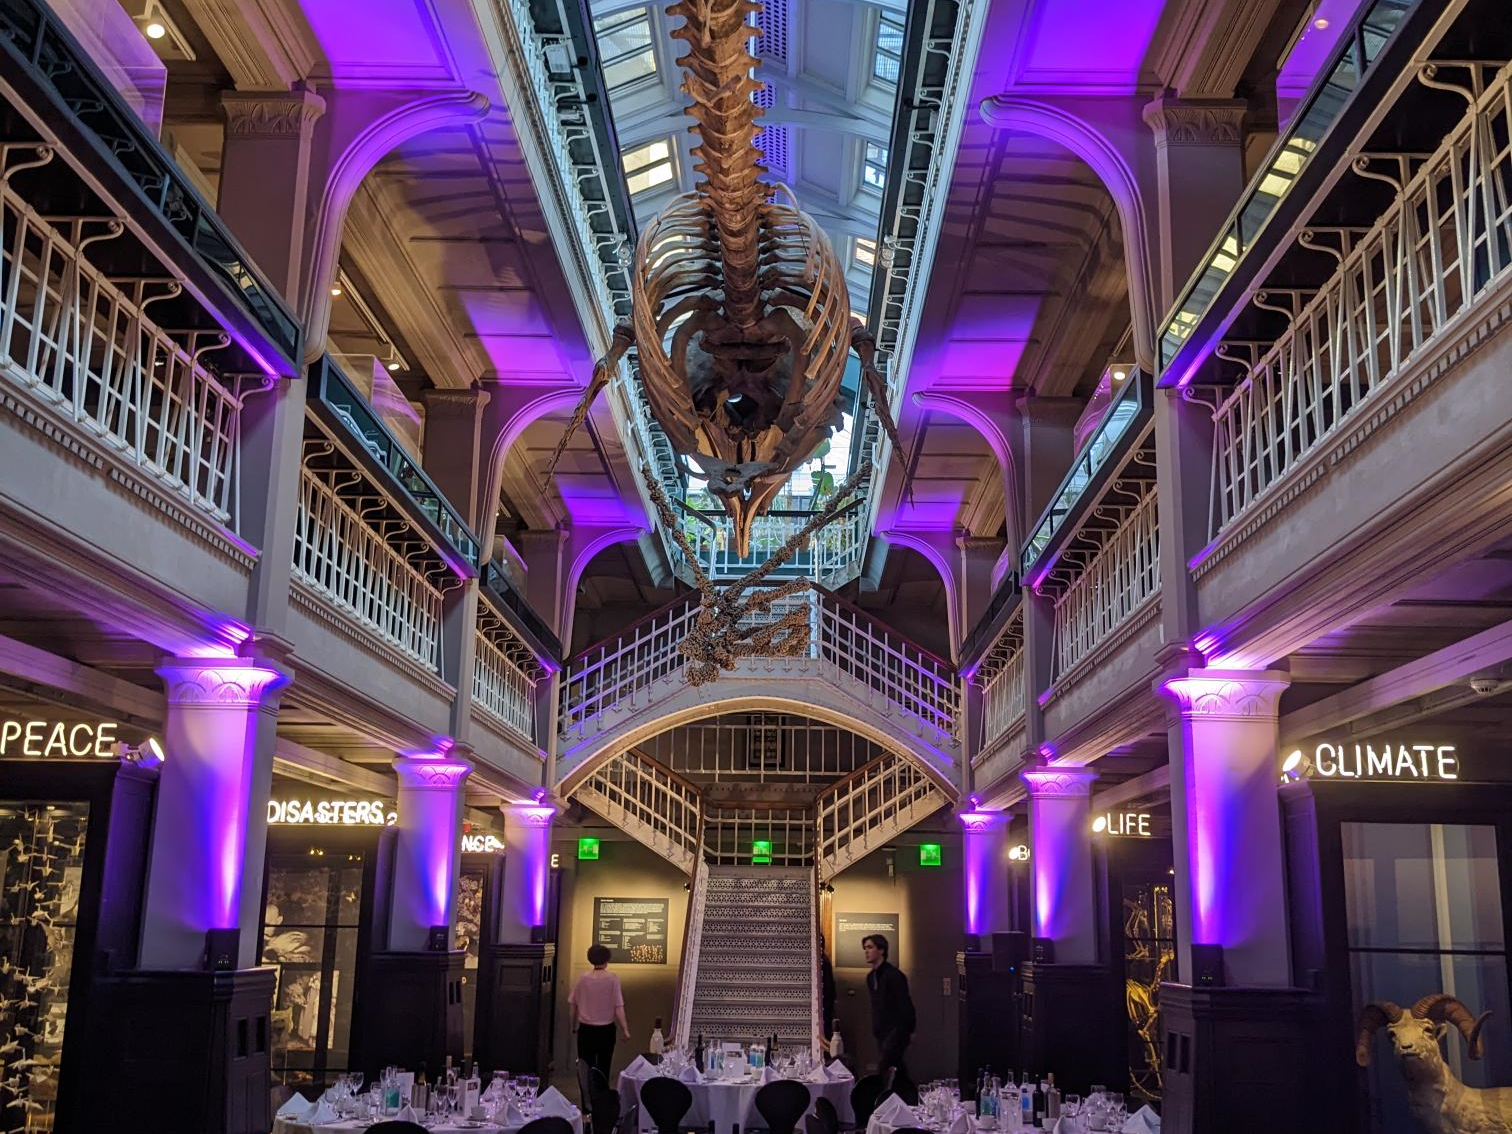 Dinner at the Manchester Museum